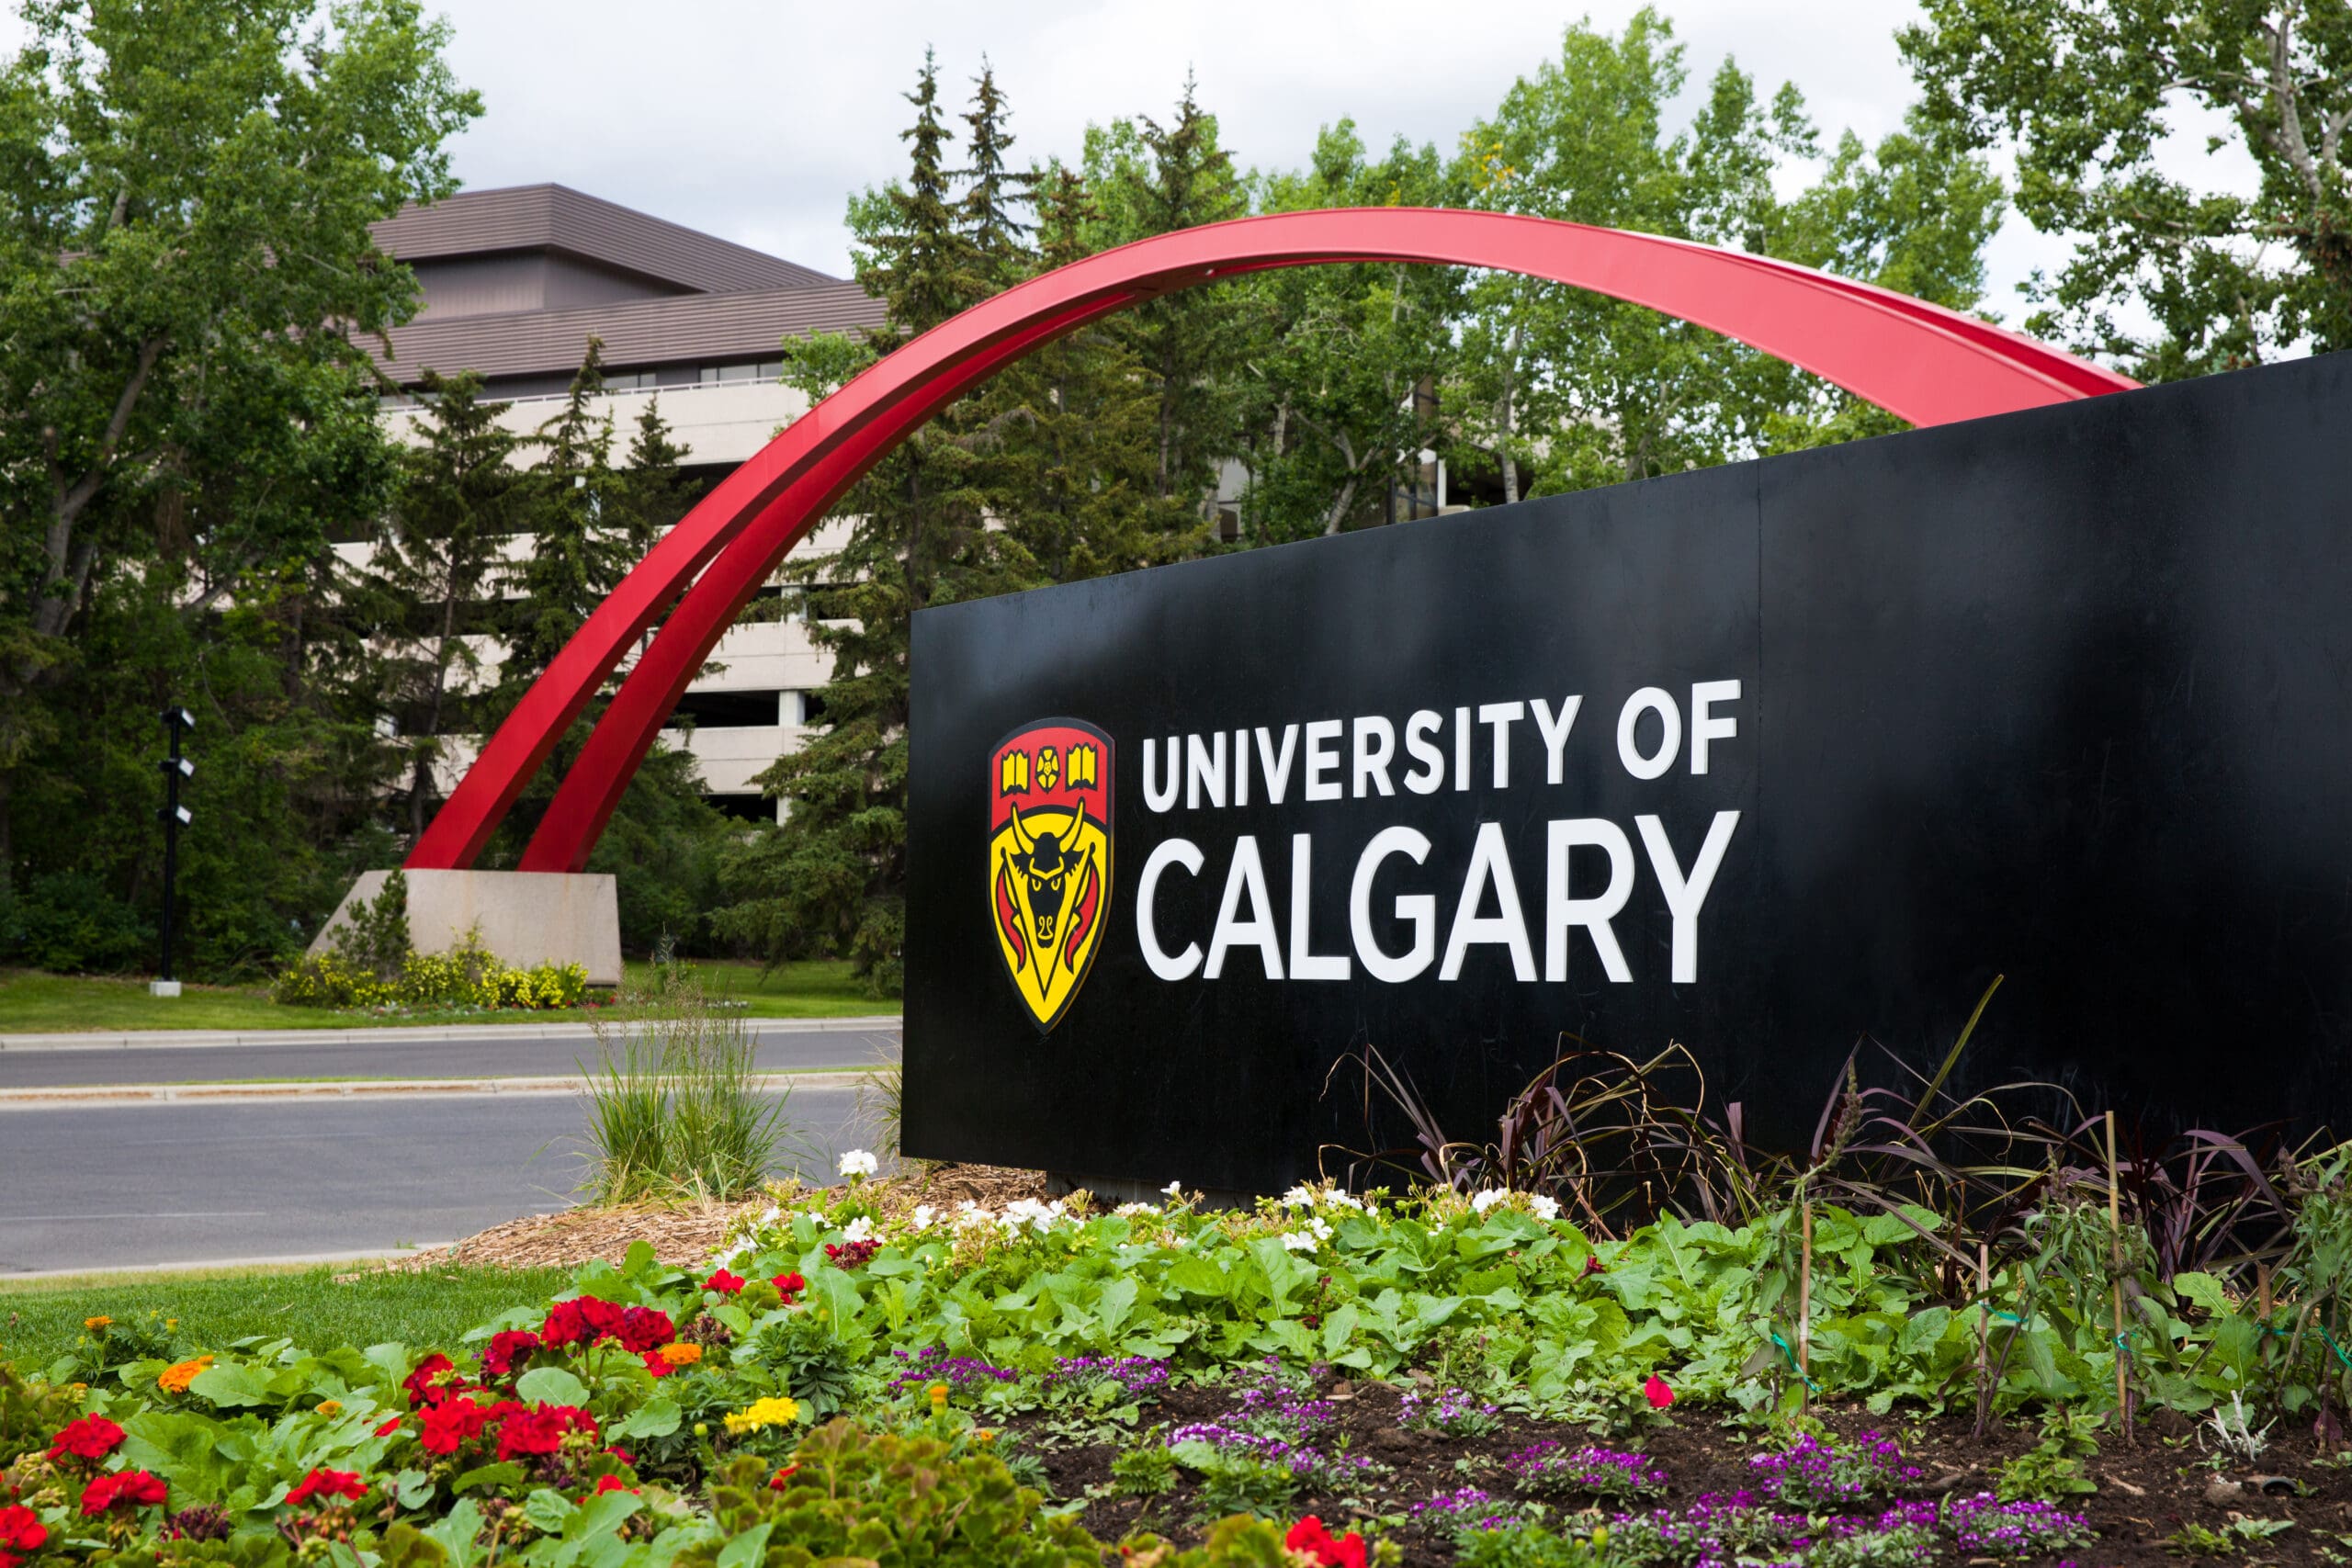 Donna appointed to University of Calgary's Senate - Finley & Associates